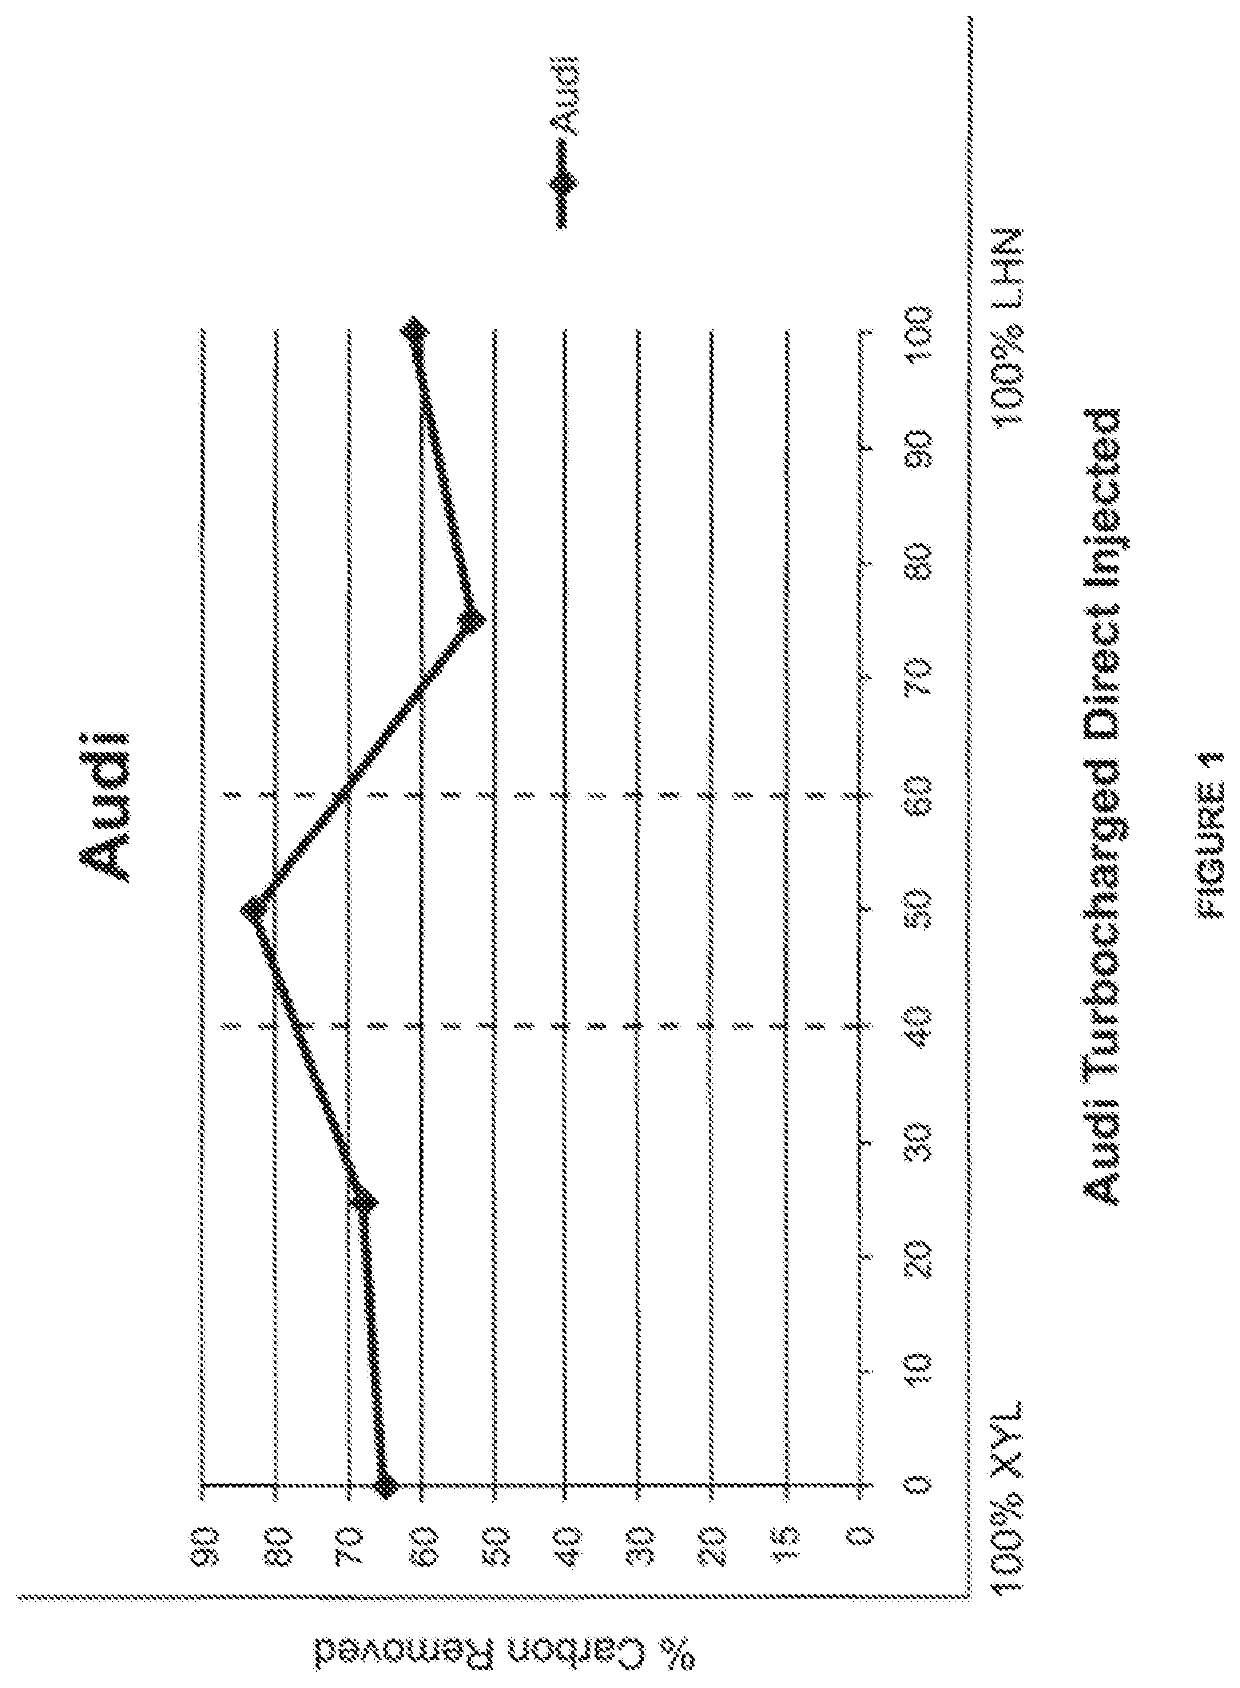 Compositions for Engine Carbon Removal from Lubricated Components